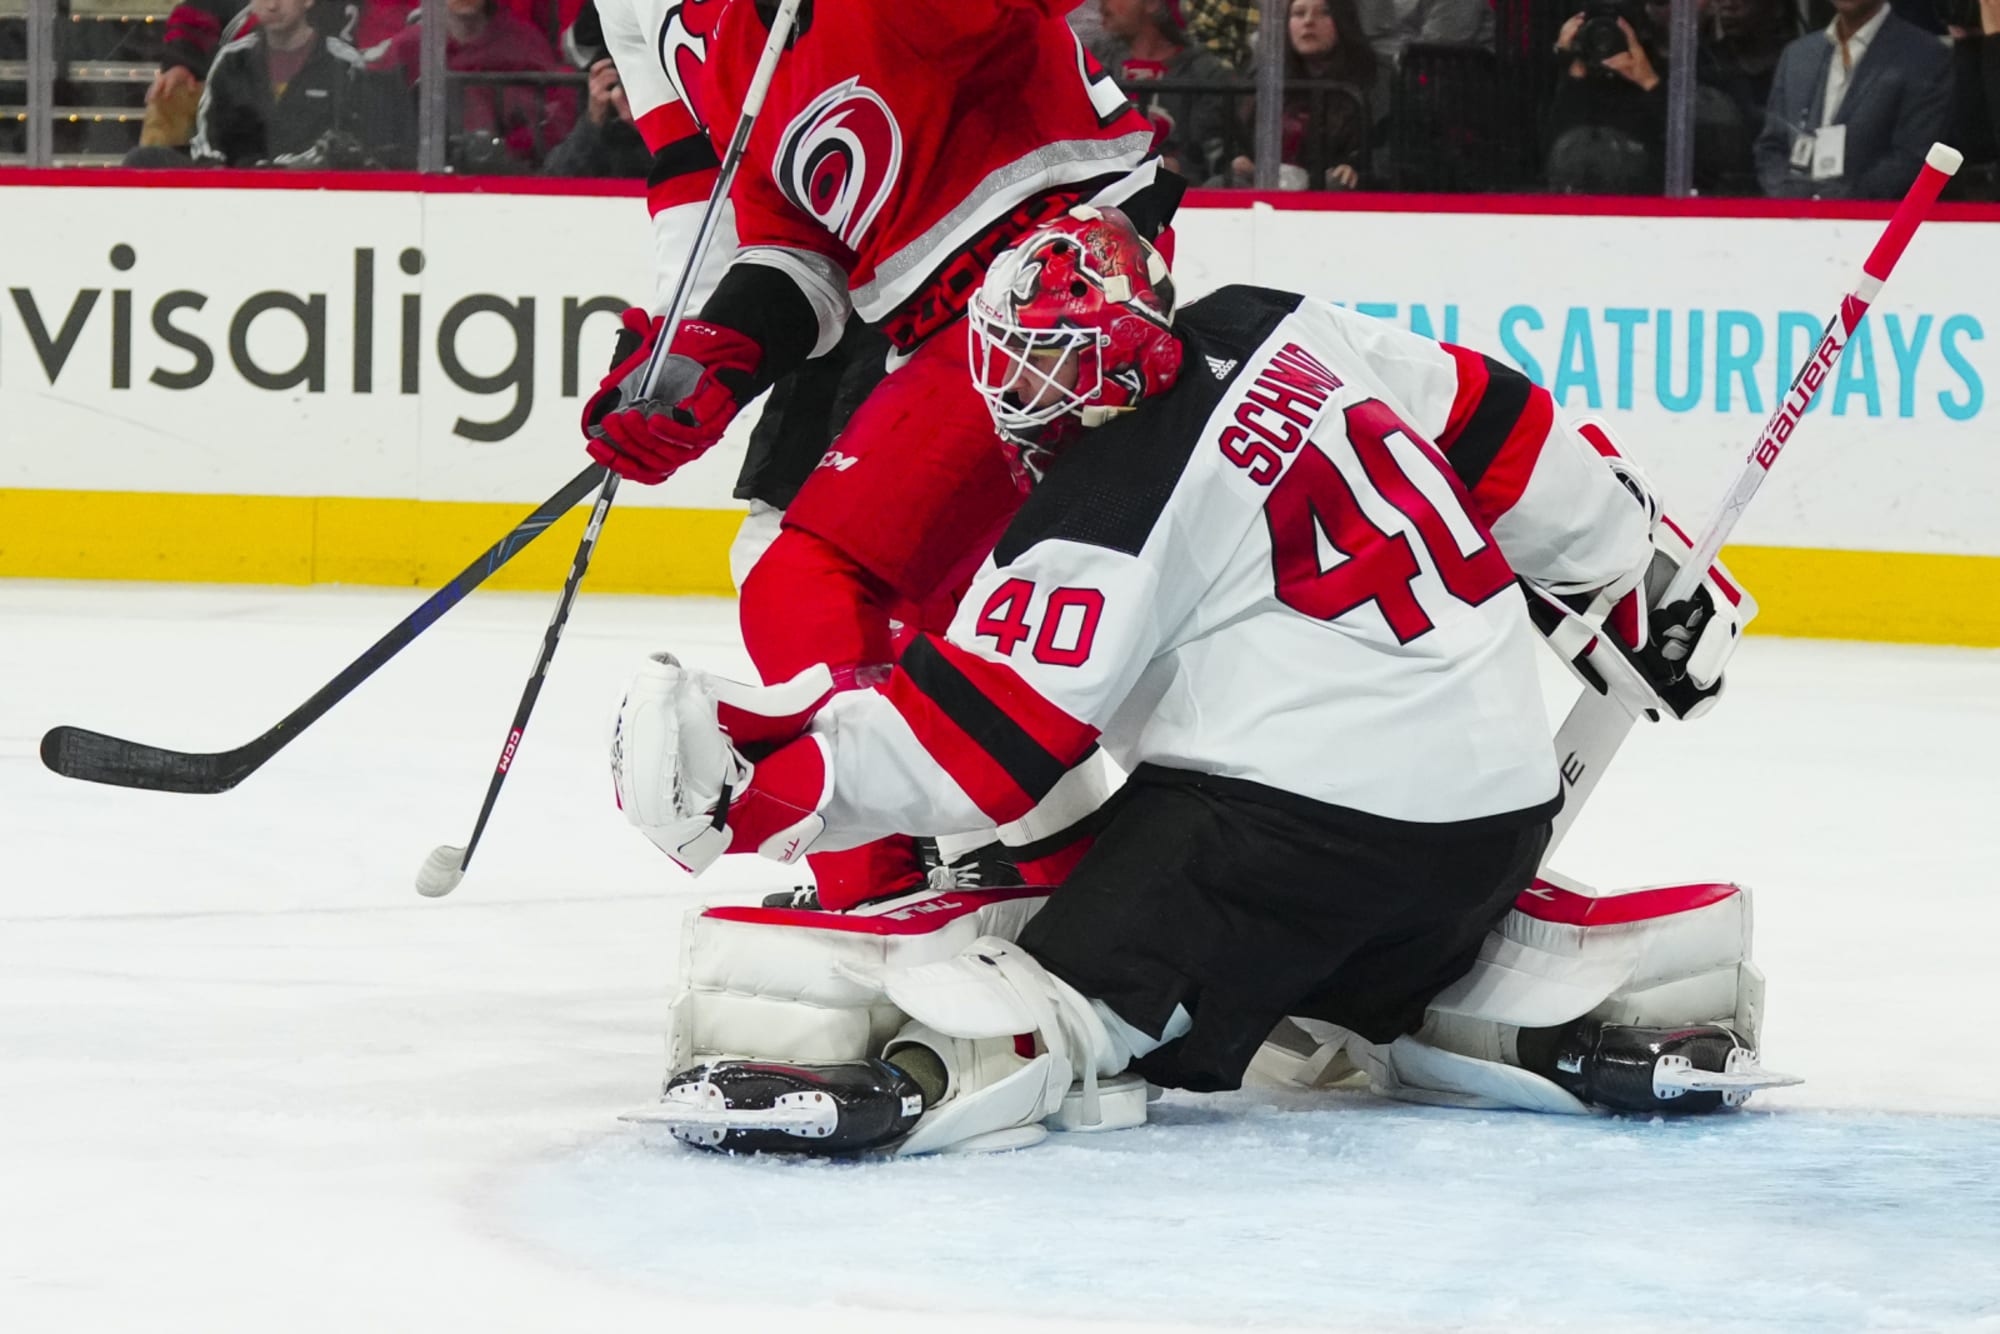 Hurricanes come back to beat Devils in overtime